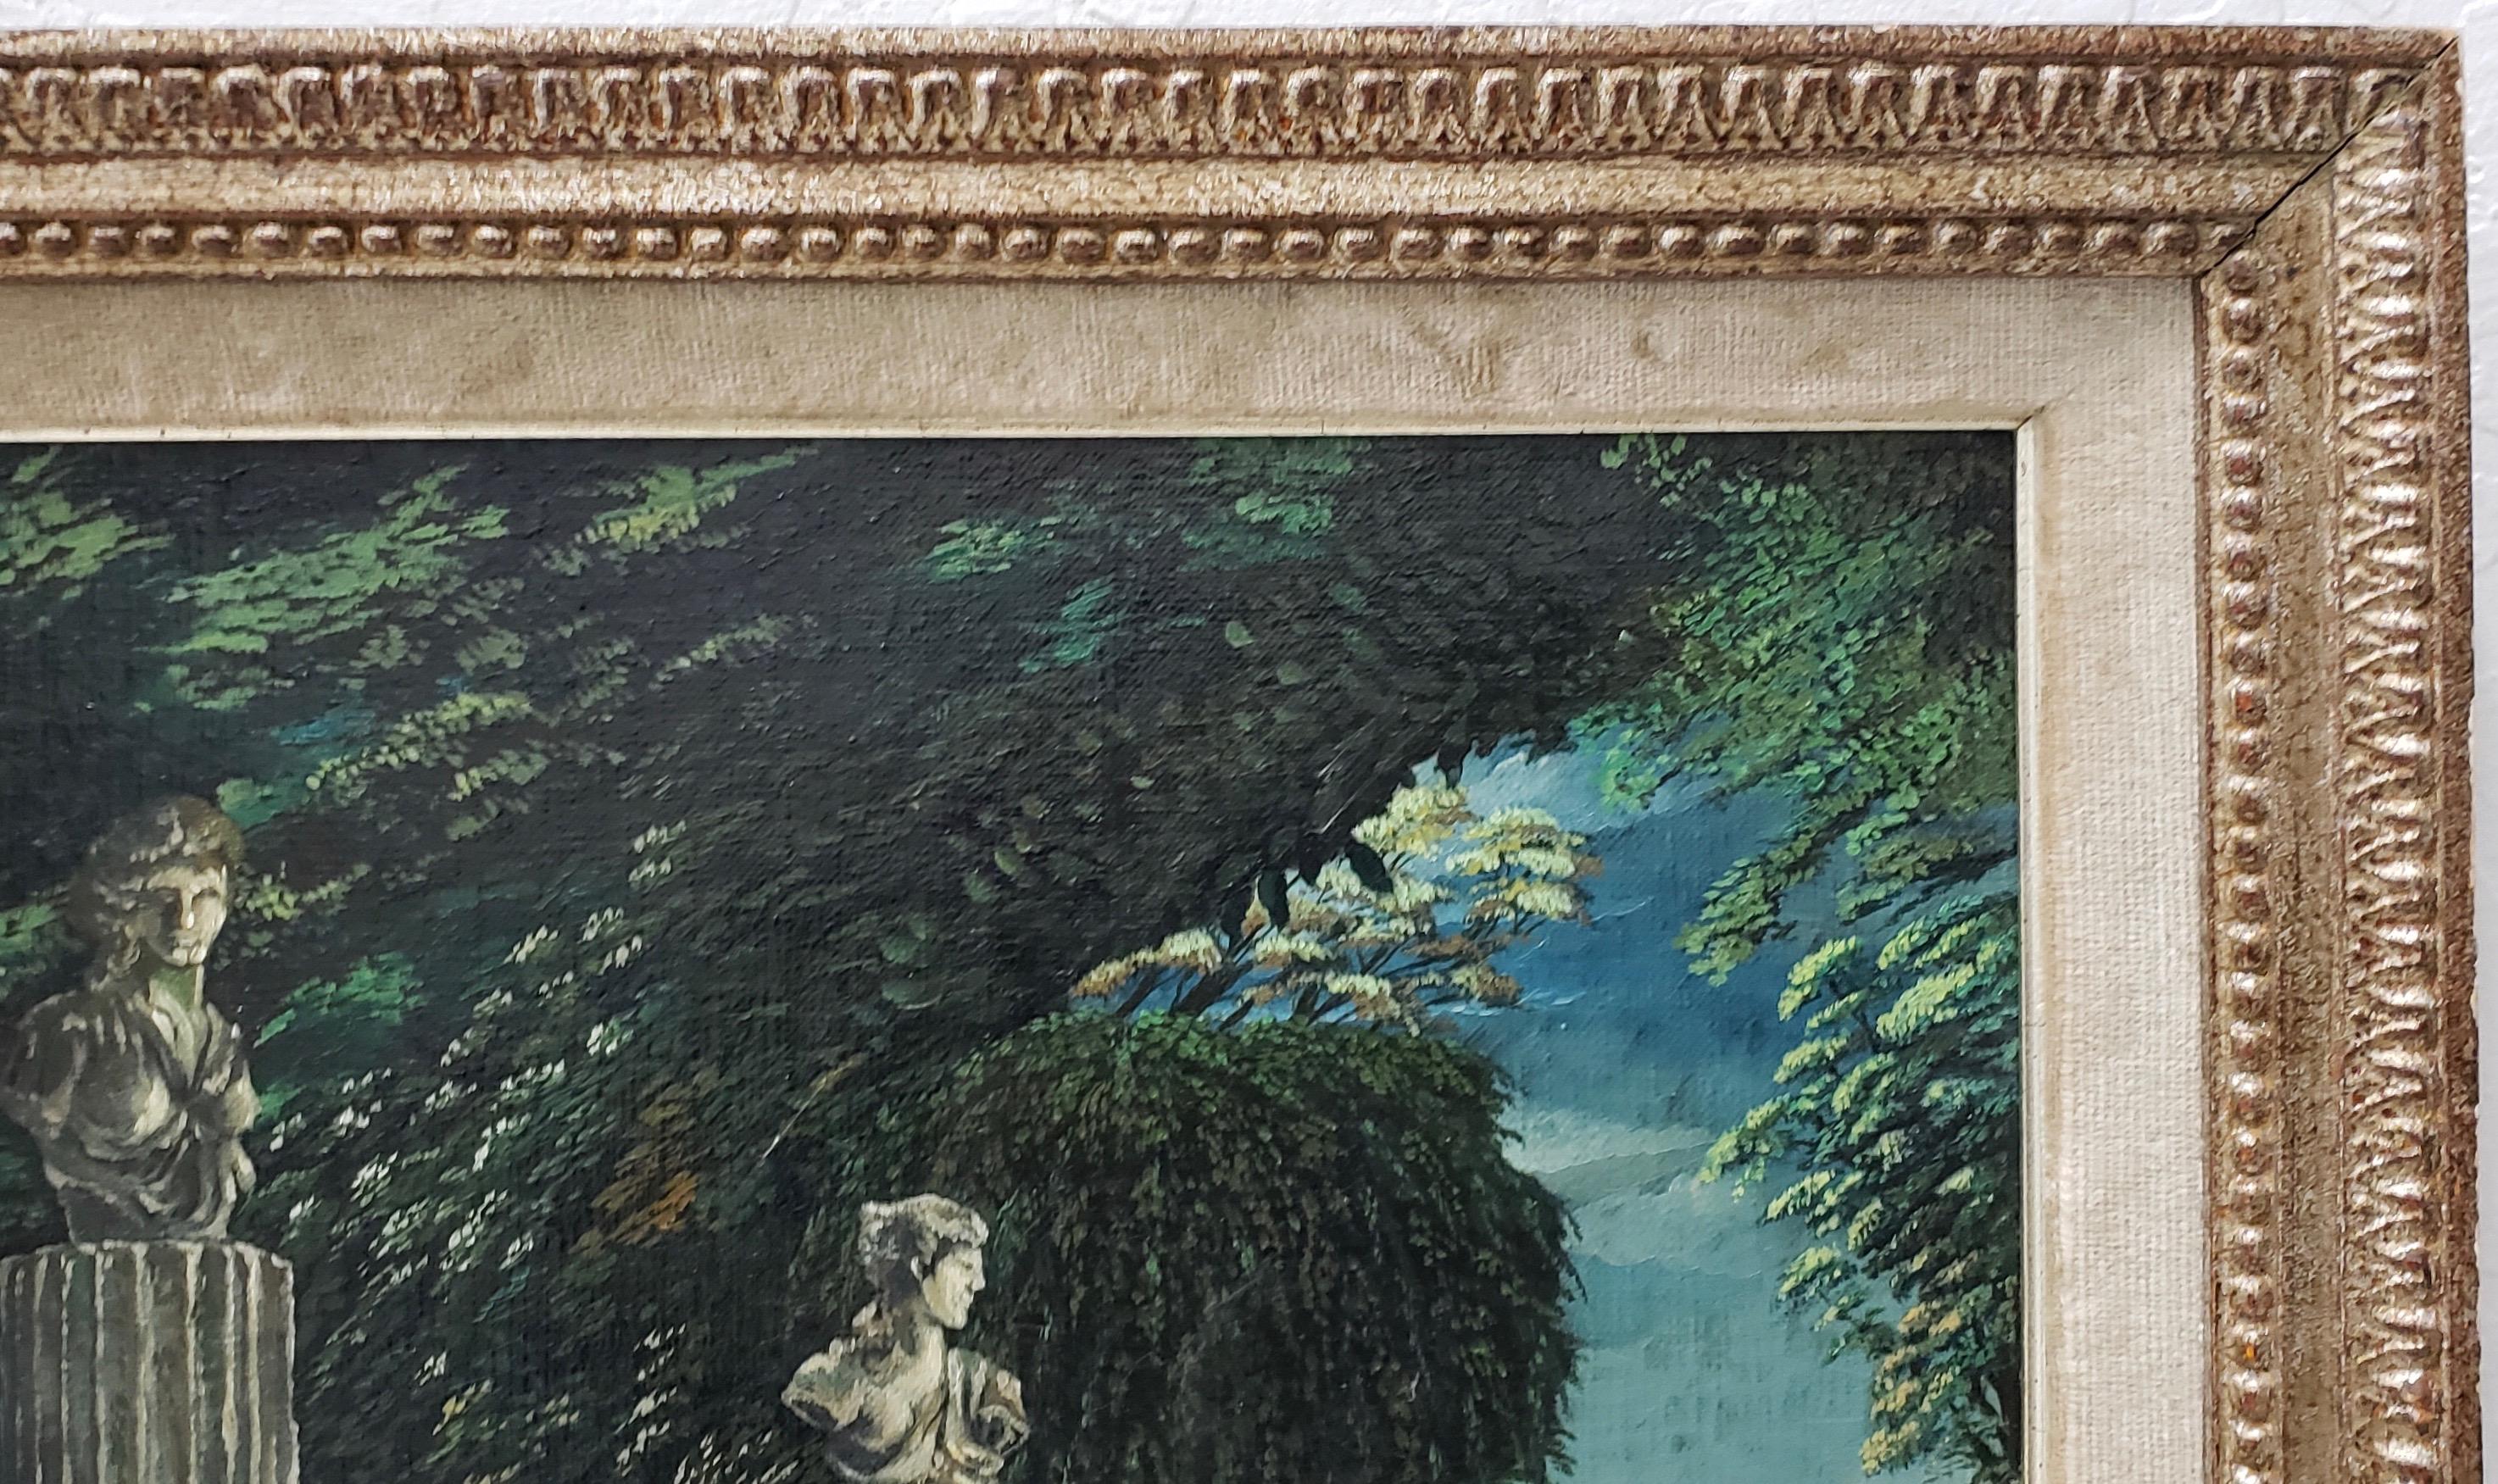 Classical Sculptures Overlooking a Lush Country Landscape Oil Painting c.1950s

Fantastic original oil painting with a surreal touch. The foreground shows the sculptures atop doric columns overlooking a country farmland landscape. At the ledge of